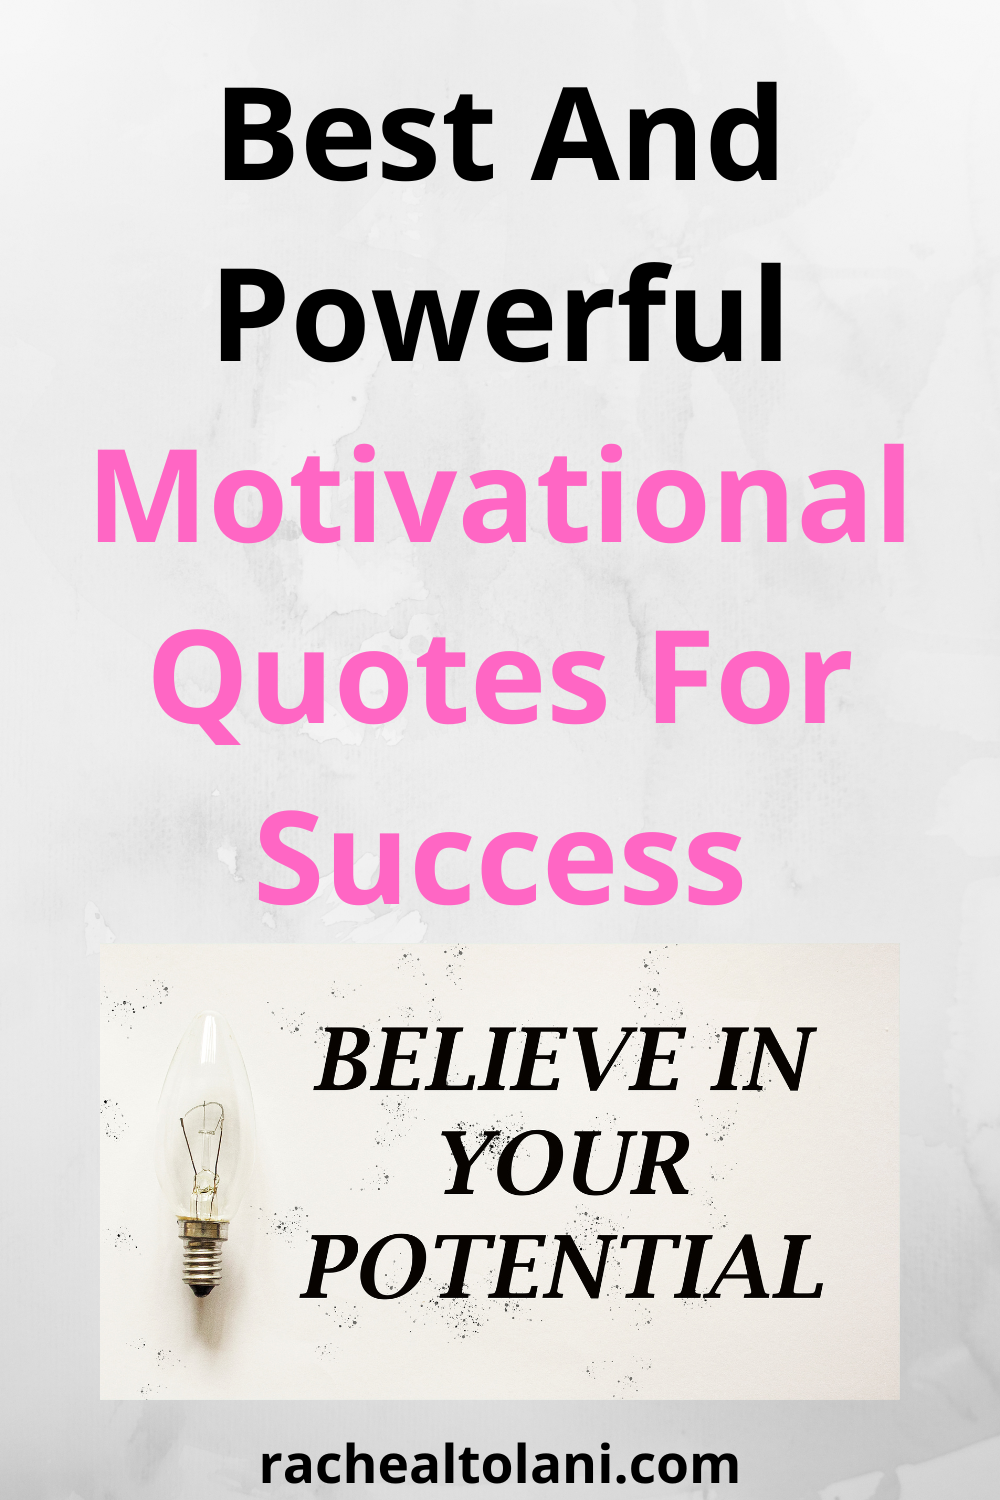 155 Best And Powerful Motivational Quotes For Success -